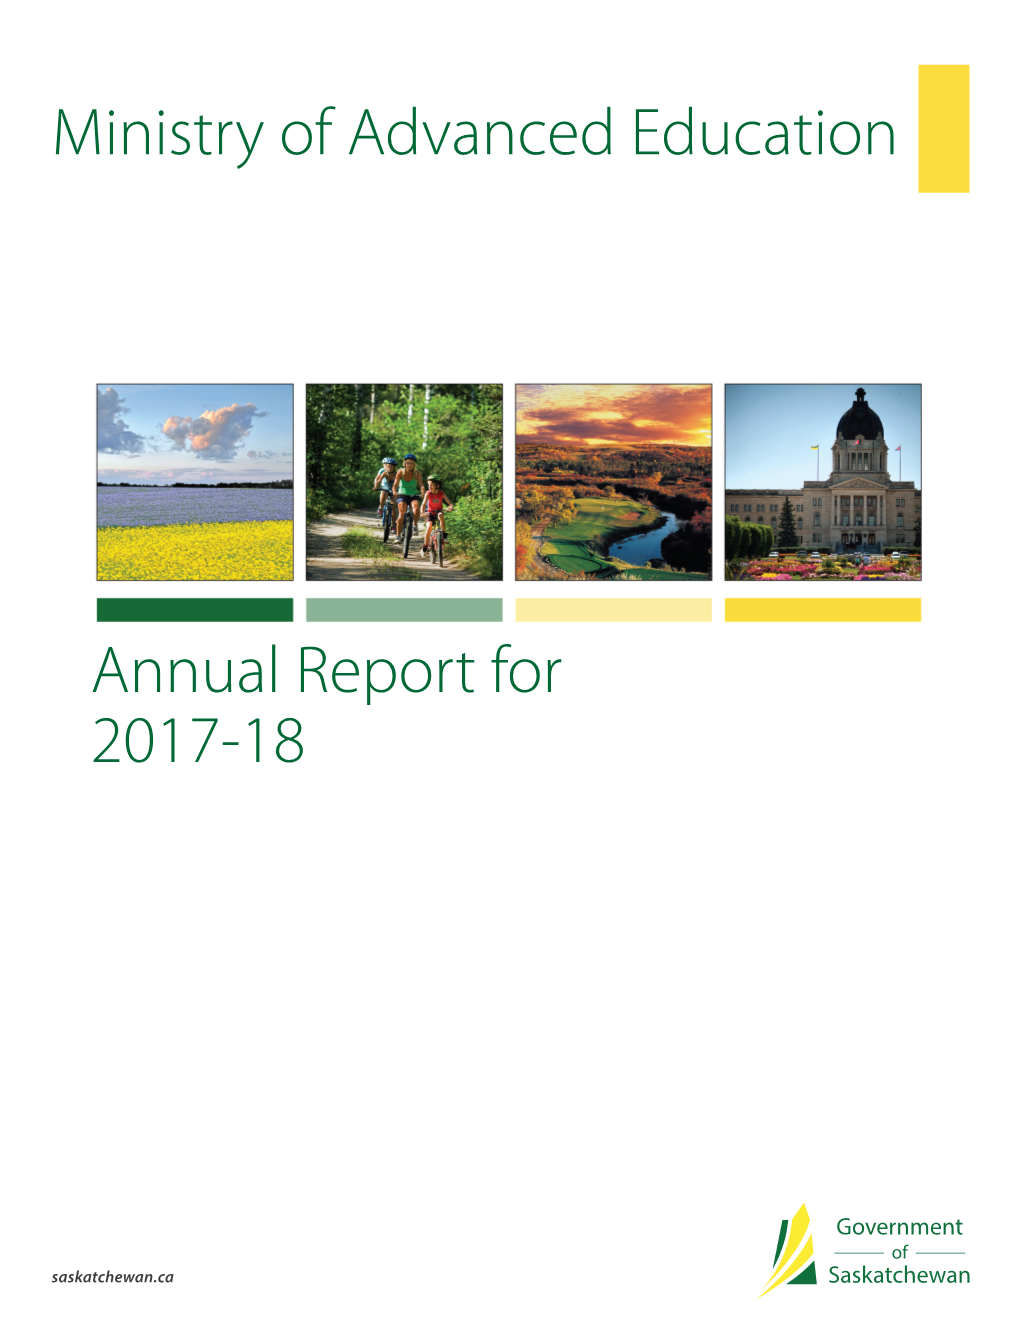 Annual Report for 2017-18 Ministry of Advanced Education